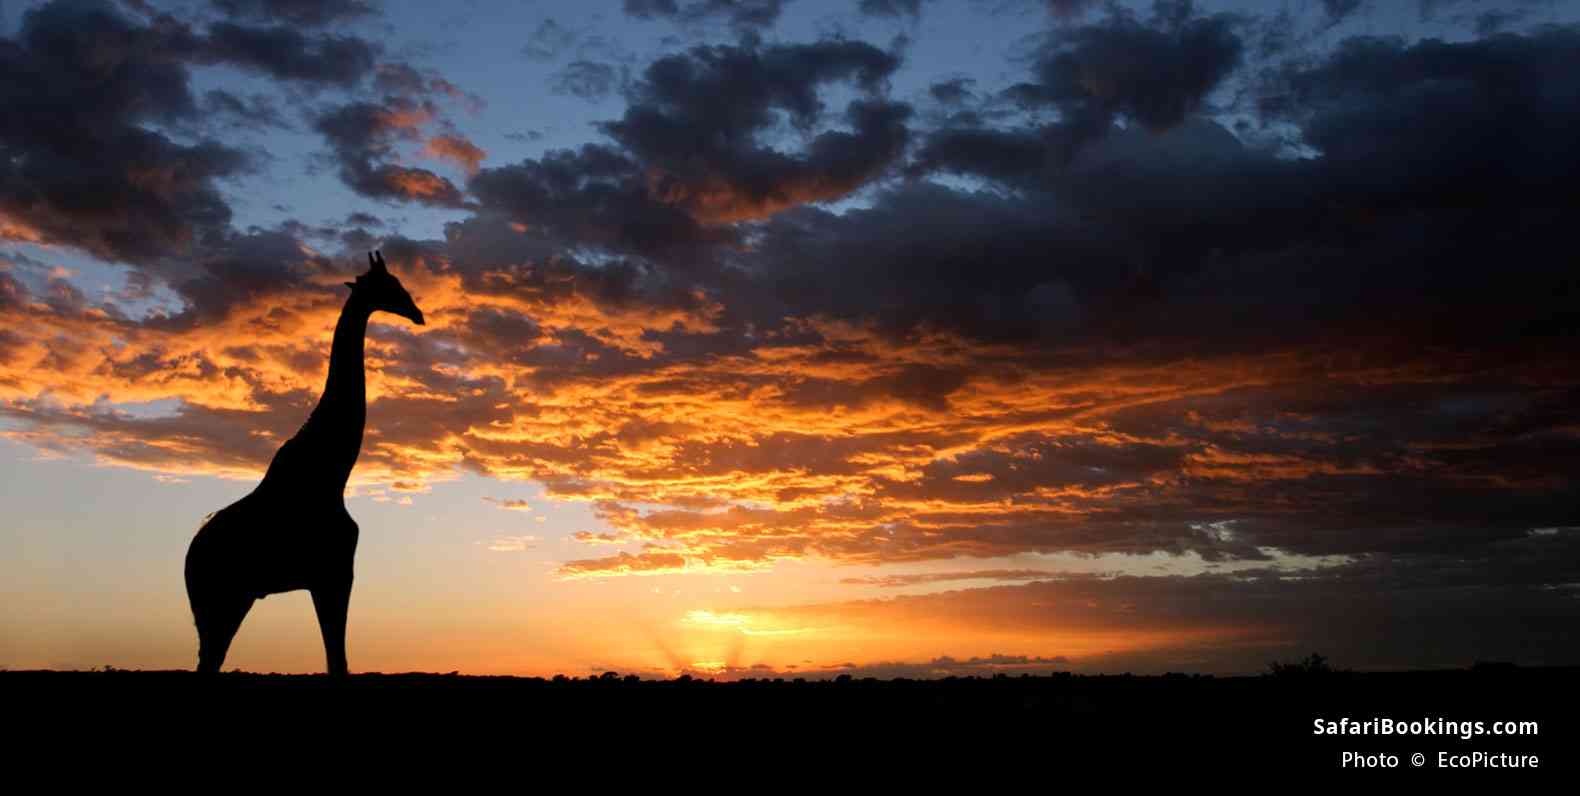 A giraffe silhouetted against a dramatic sunset with clouds